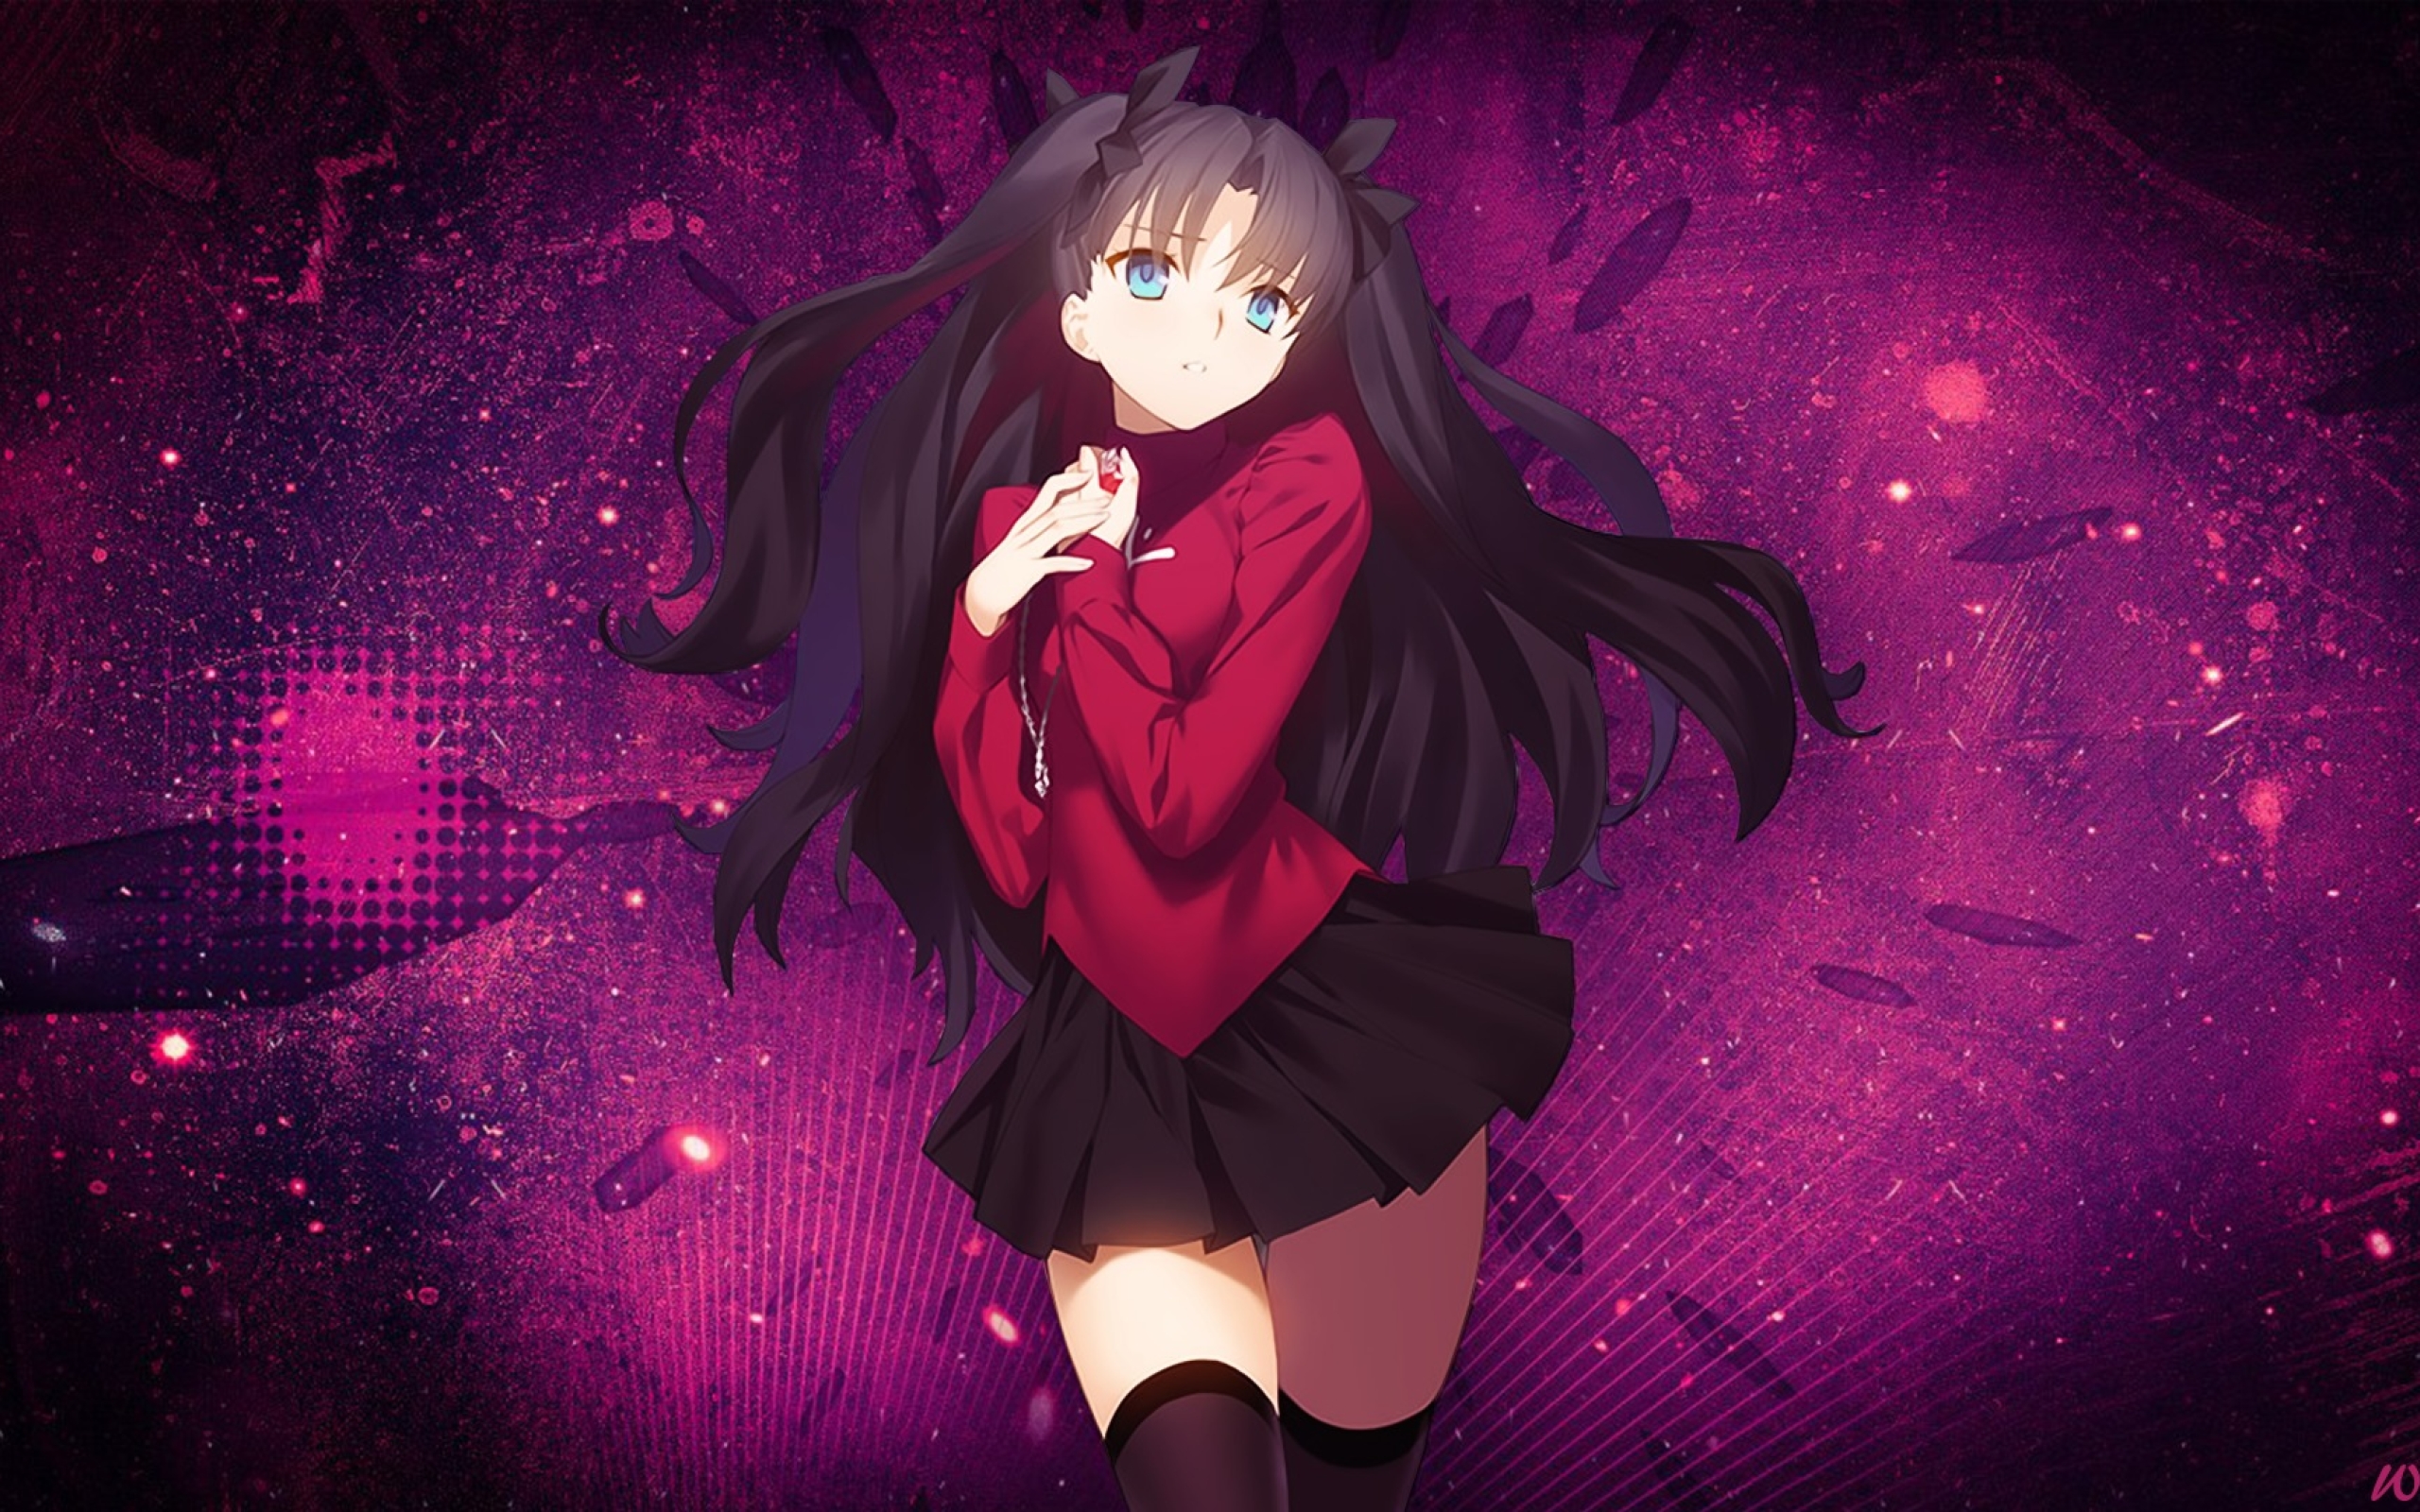 2560x1600 Rin Tohsaka Fate Stay Night Unlimited Blade Works 2560x1600 Resolution Wallpaper Hd Anime 4k Wallpapers Images Photos And Background